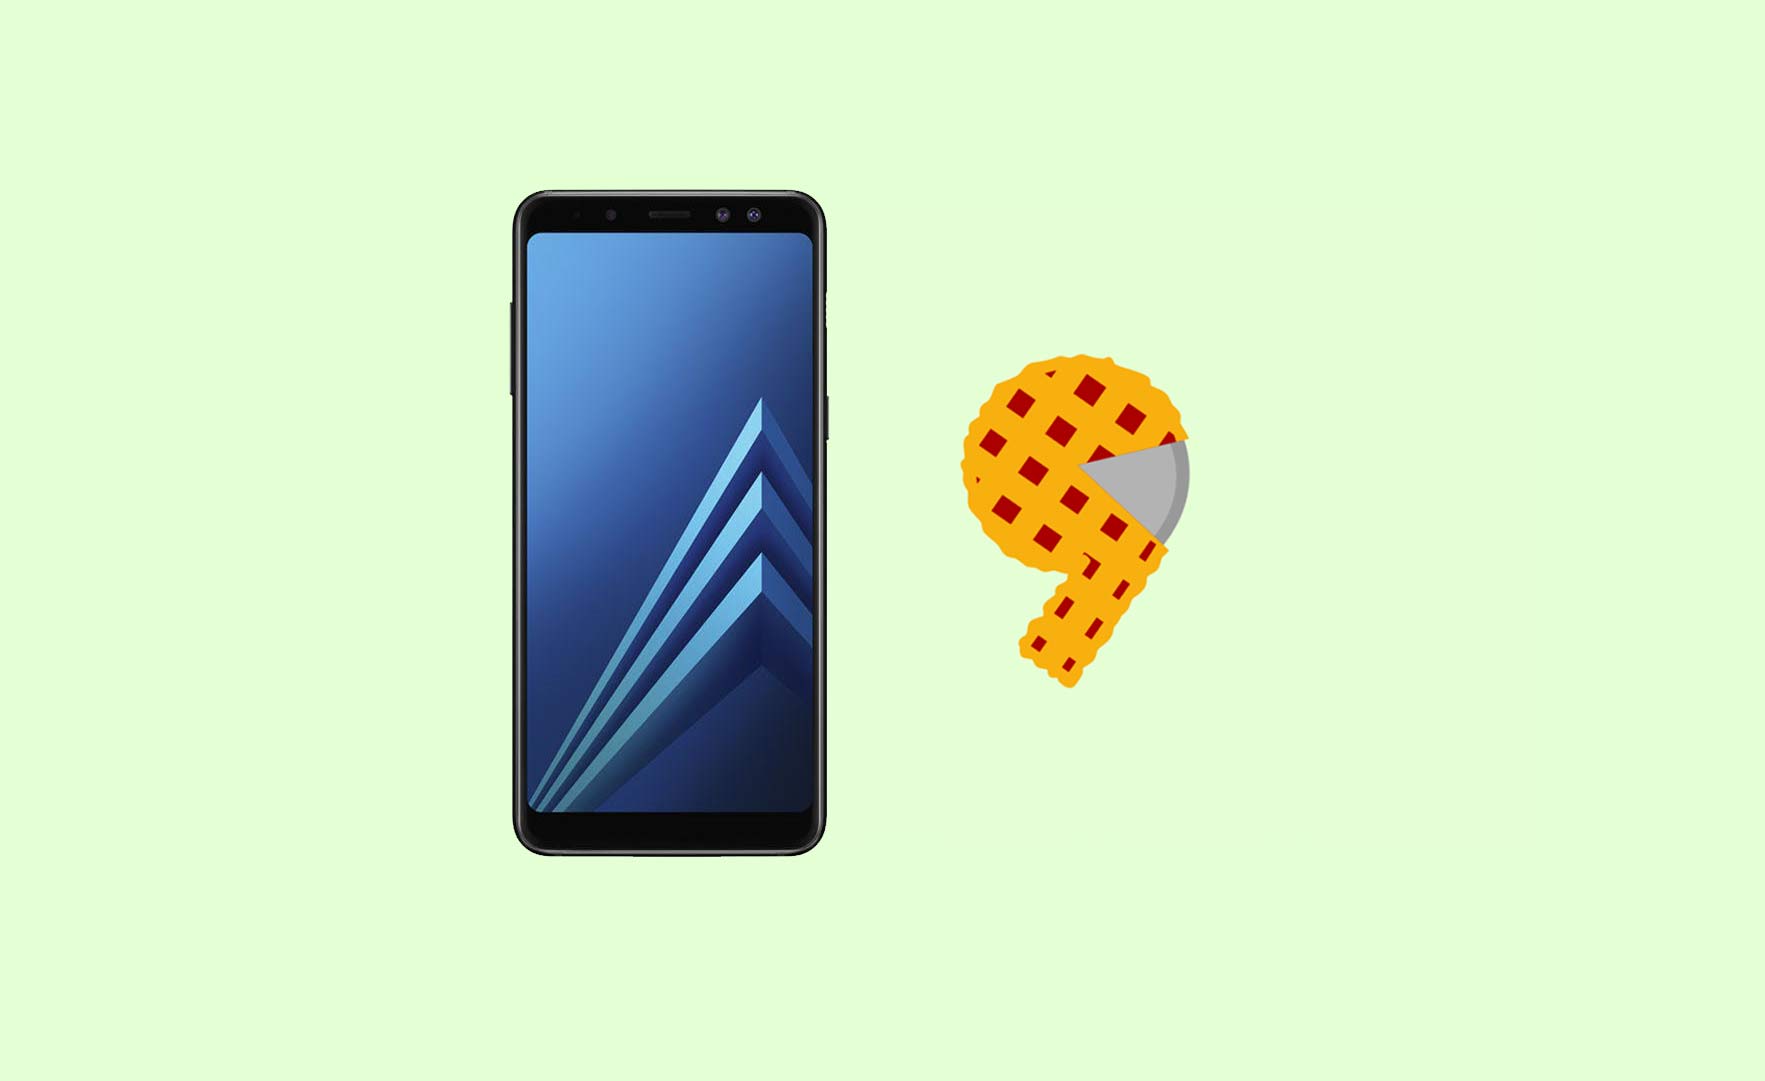 Download A730FXXU4CSD1 / A730FXXU4CSD6: Android Pie Update for Galaxy A8 Plus